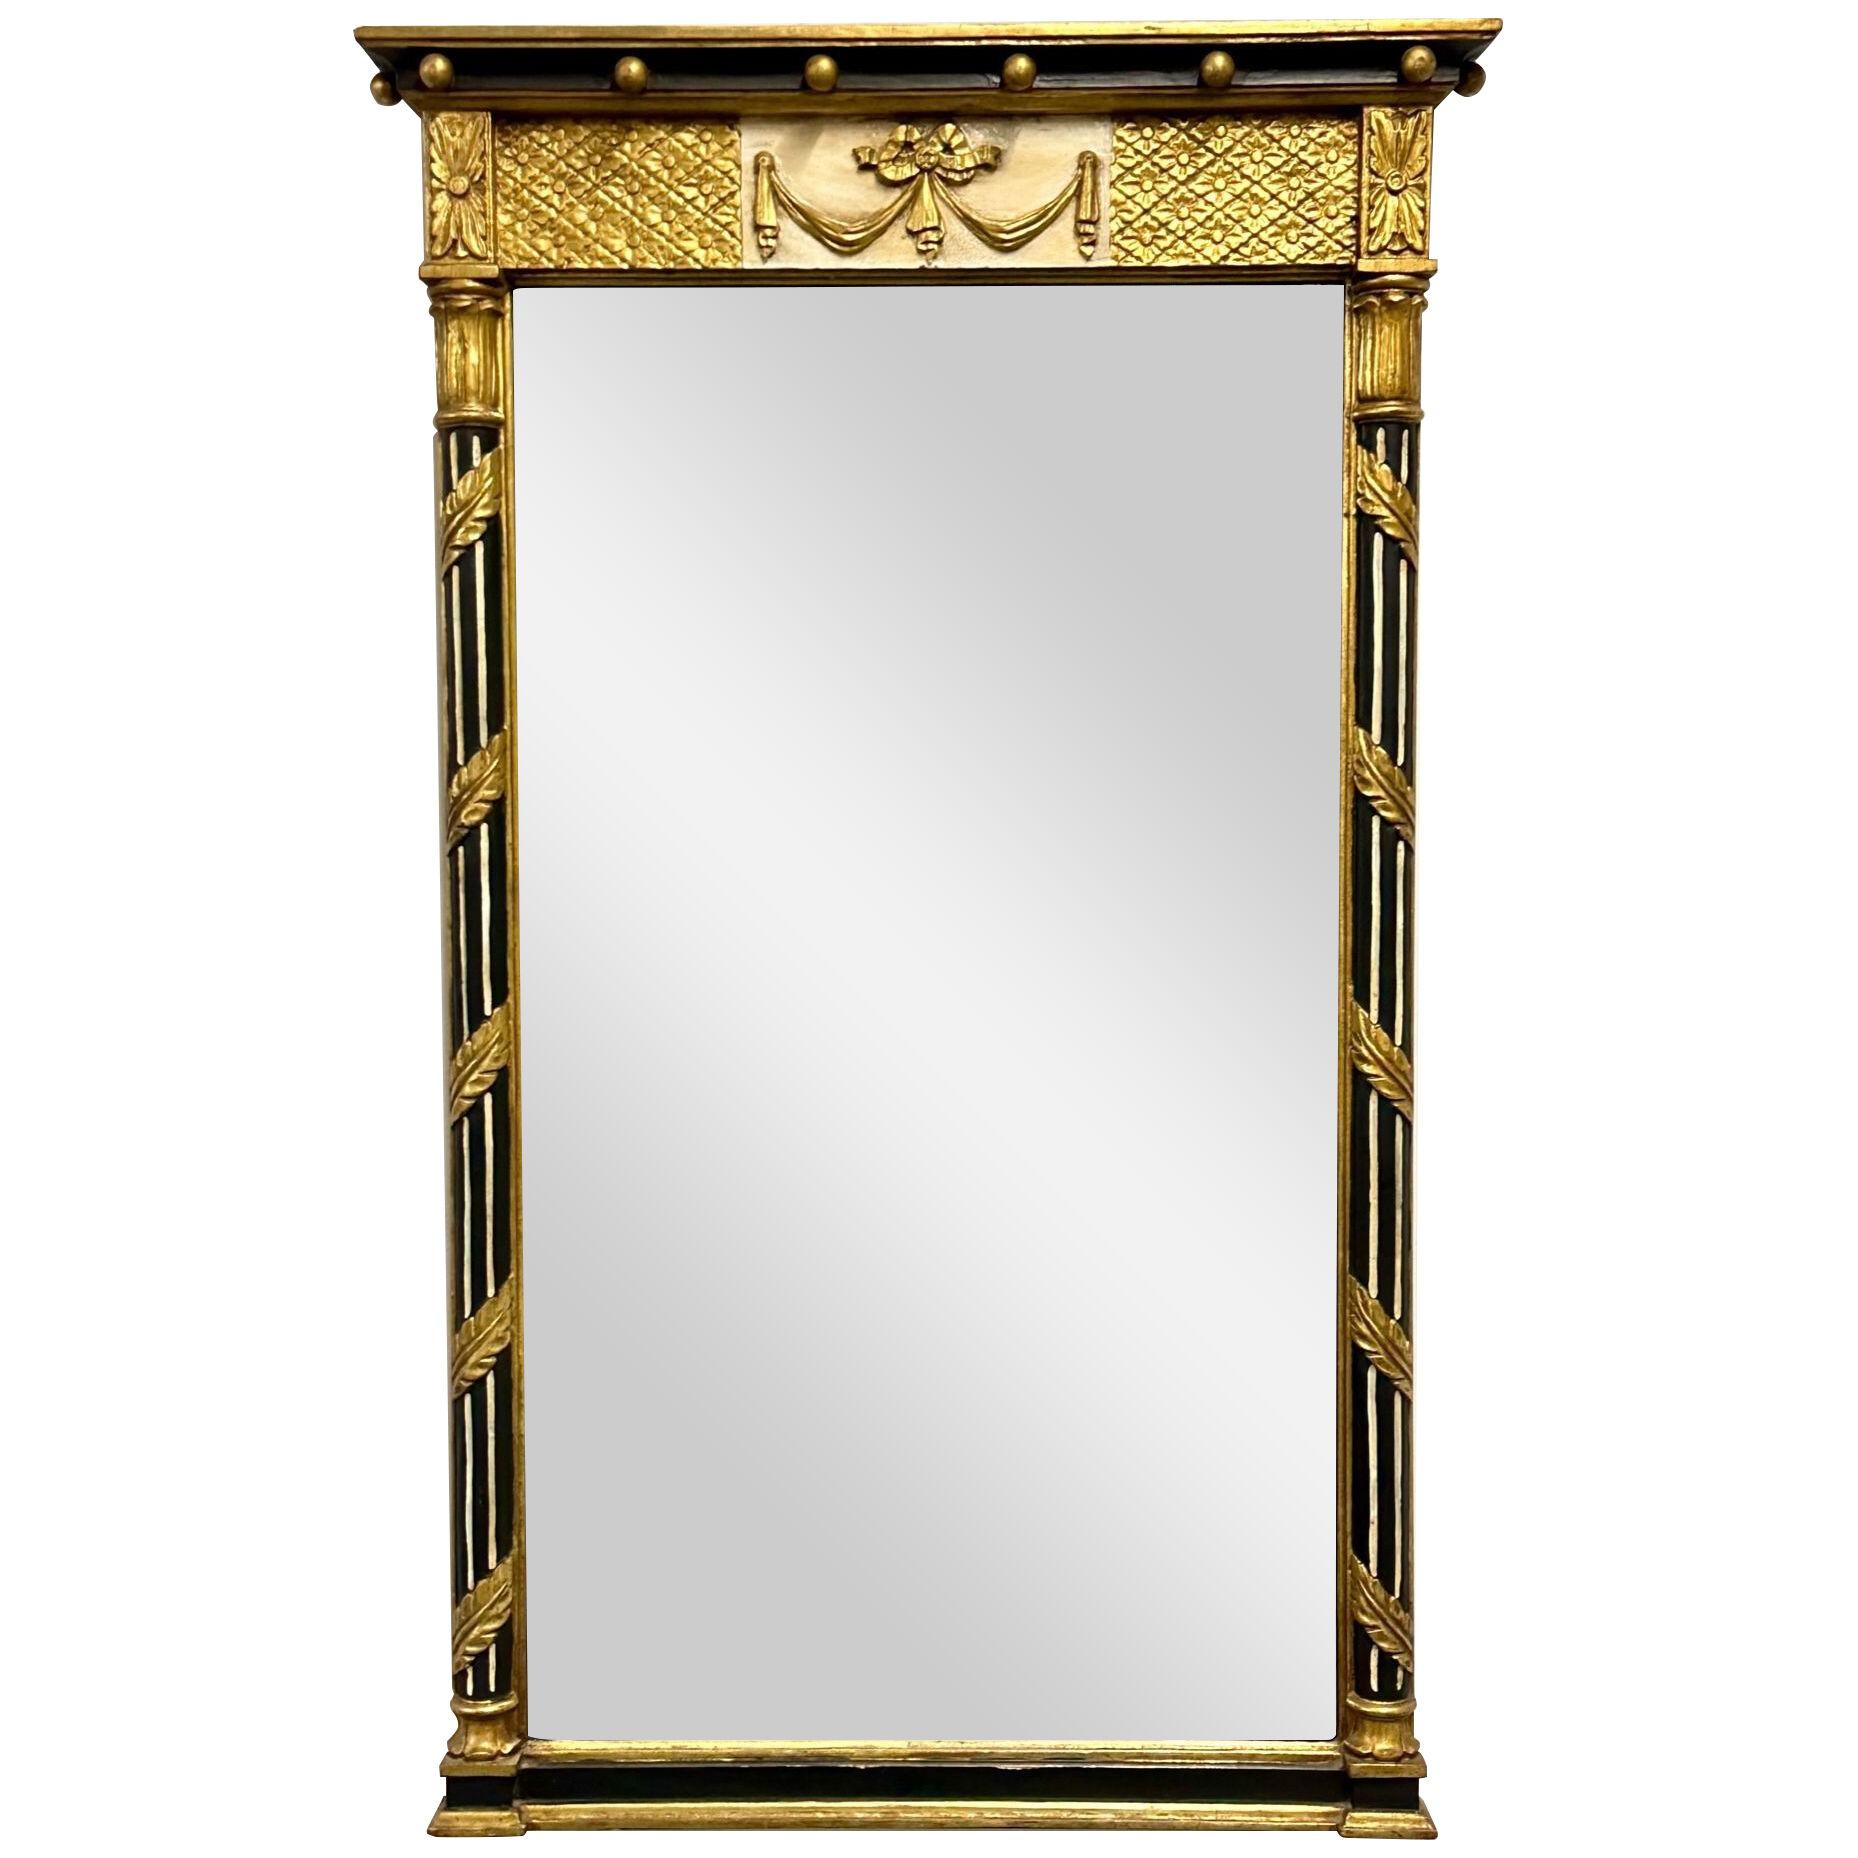 Hollywood Regency Giltwood Mirror, Wall / Console Mirror, Made in Italy